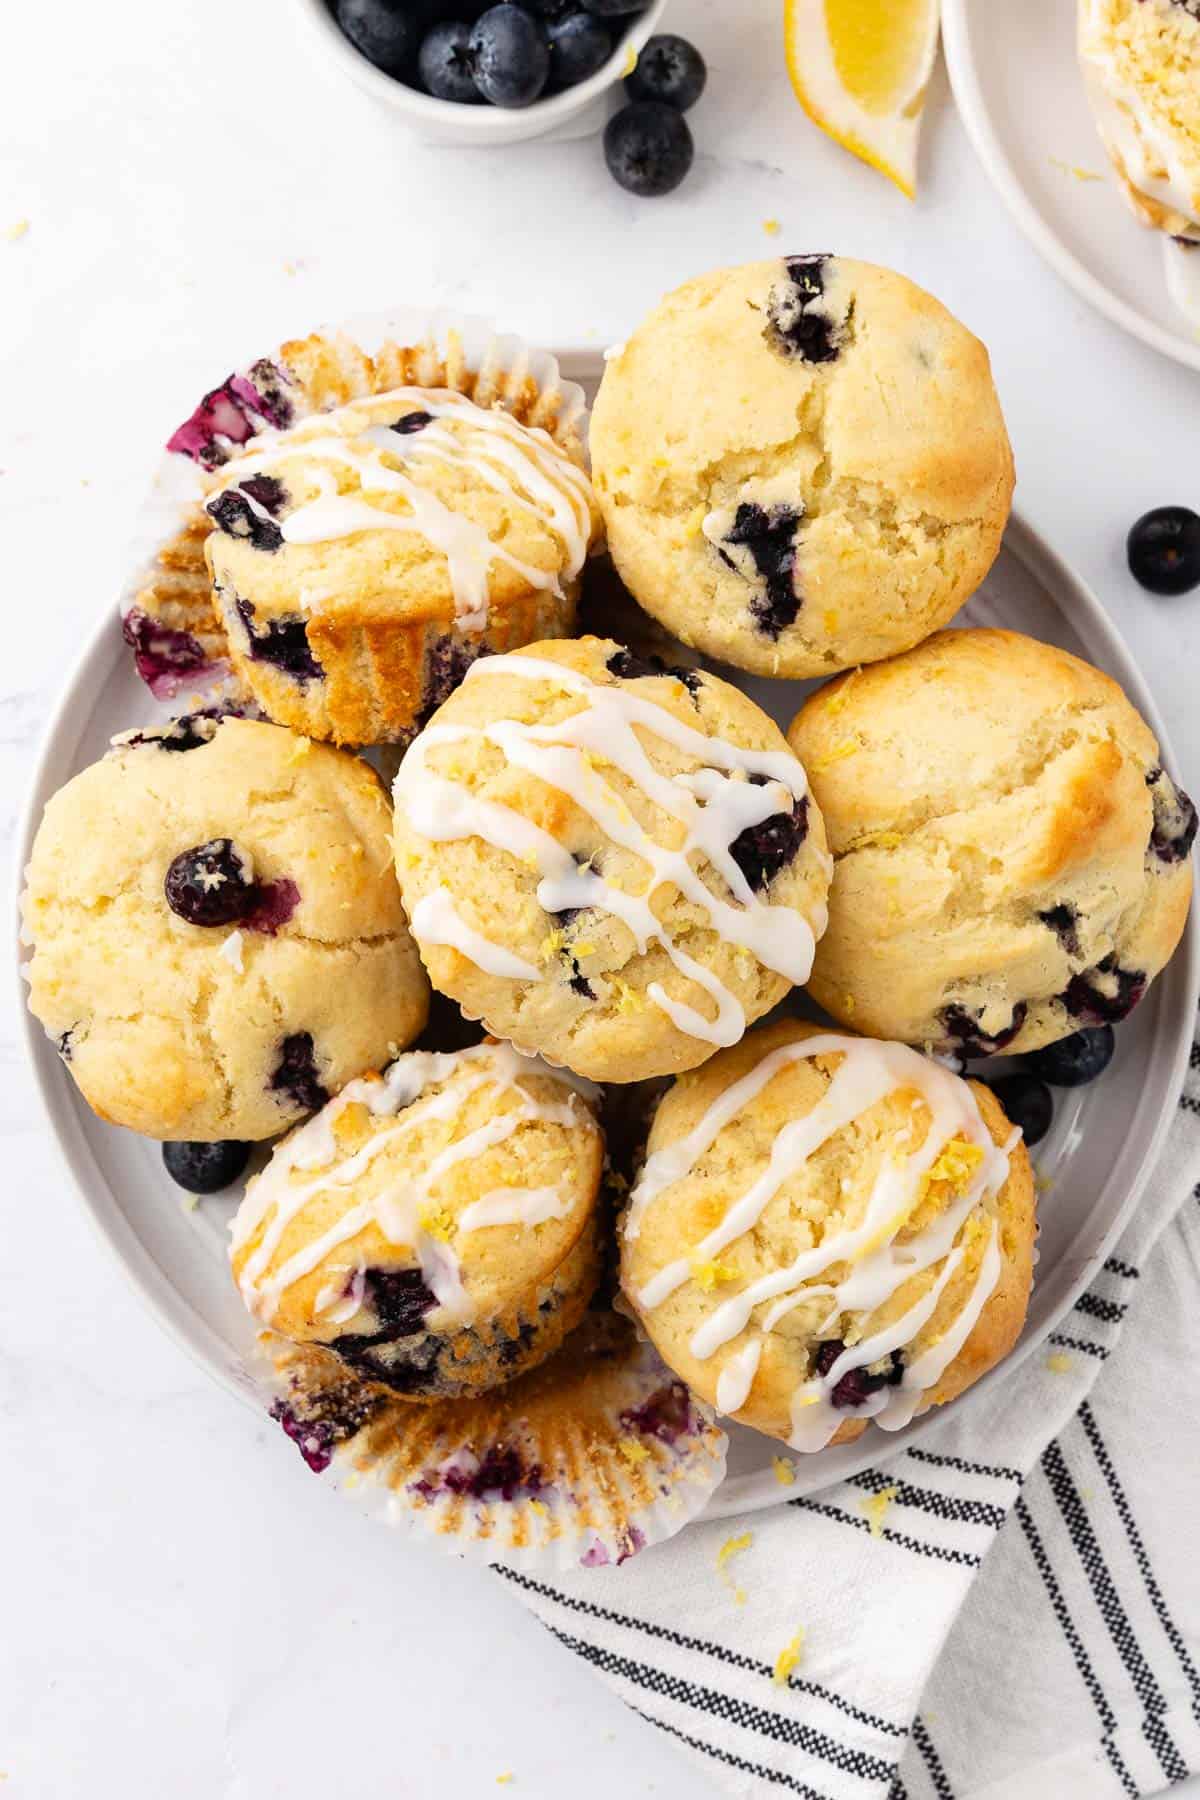 Several Lemon Blueberry Muffins on a plate. Some of the muffins are topped with a lemon glaze.